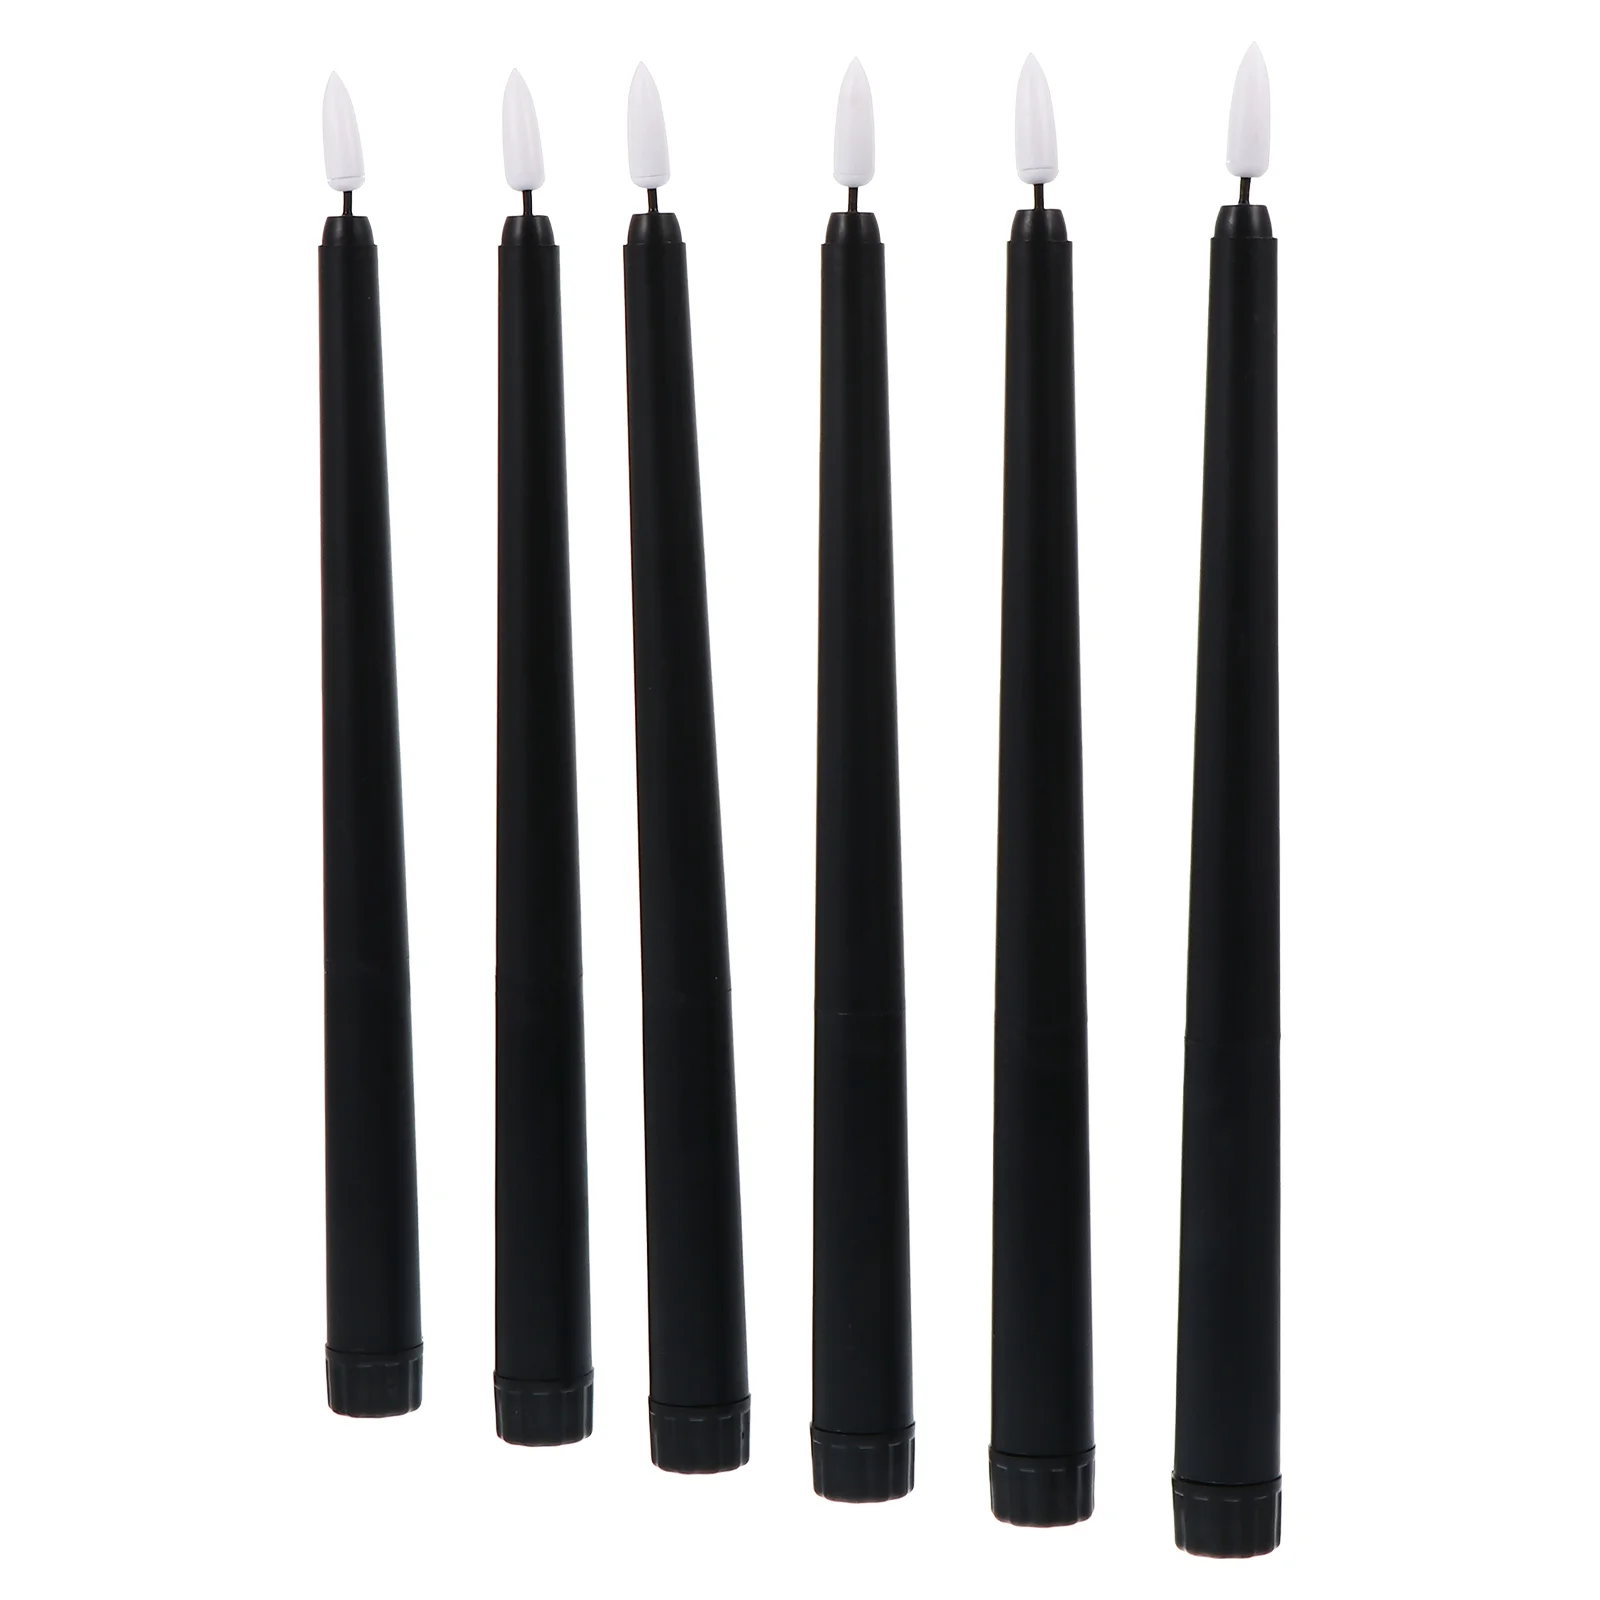 

6Pcs Black Flemeless Led Taper Candles Flickering Moving Wick Flickering Warm White Taper Candle Wick Dripping-Wax Effect